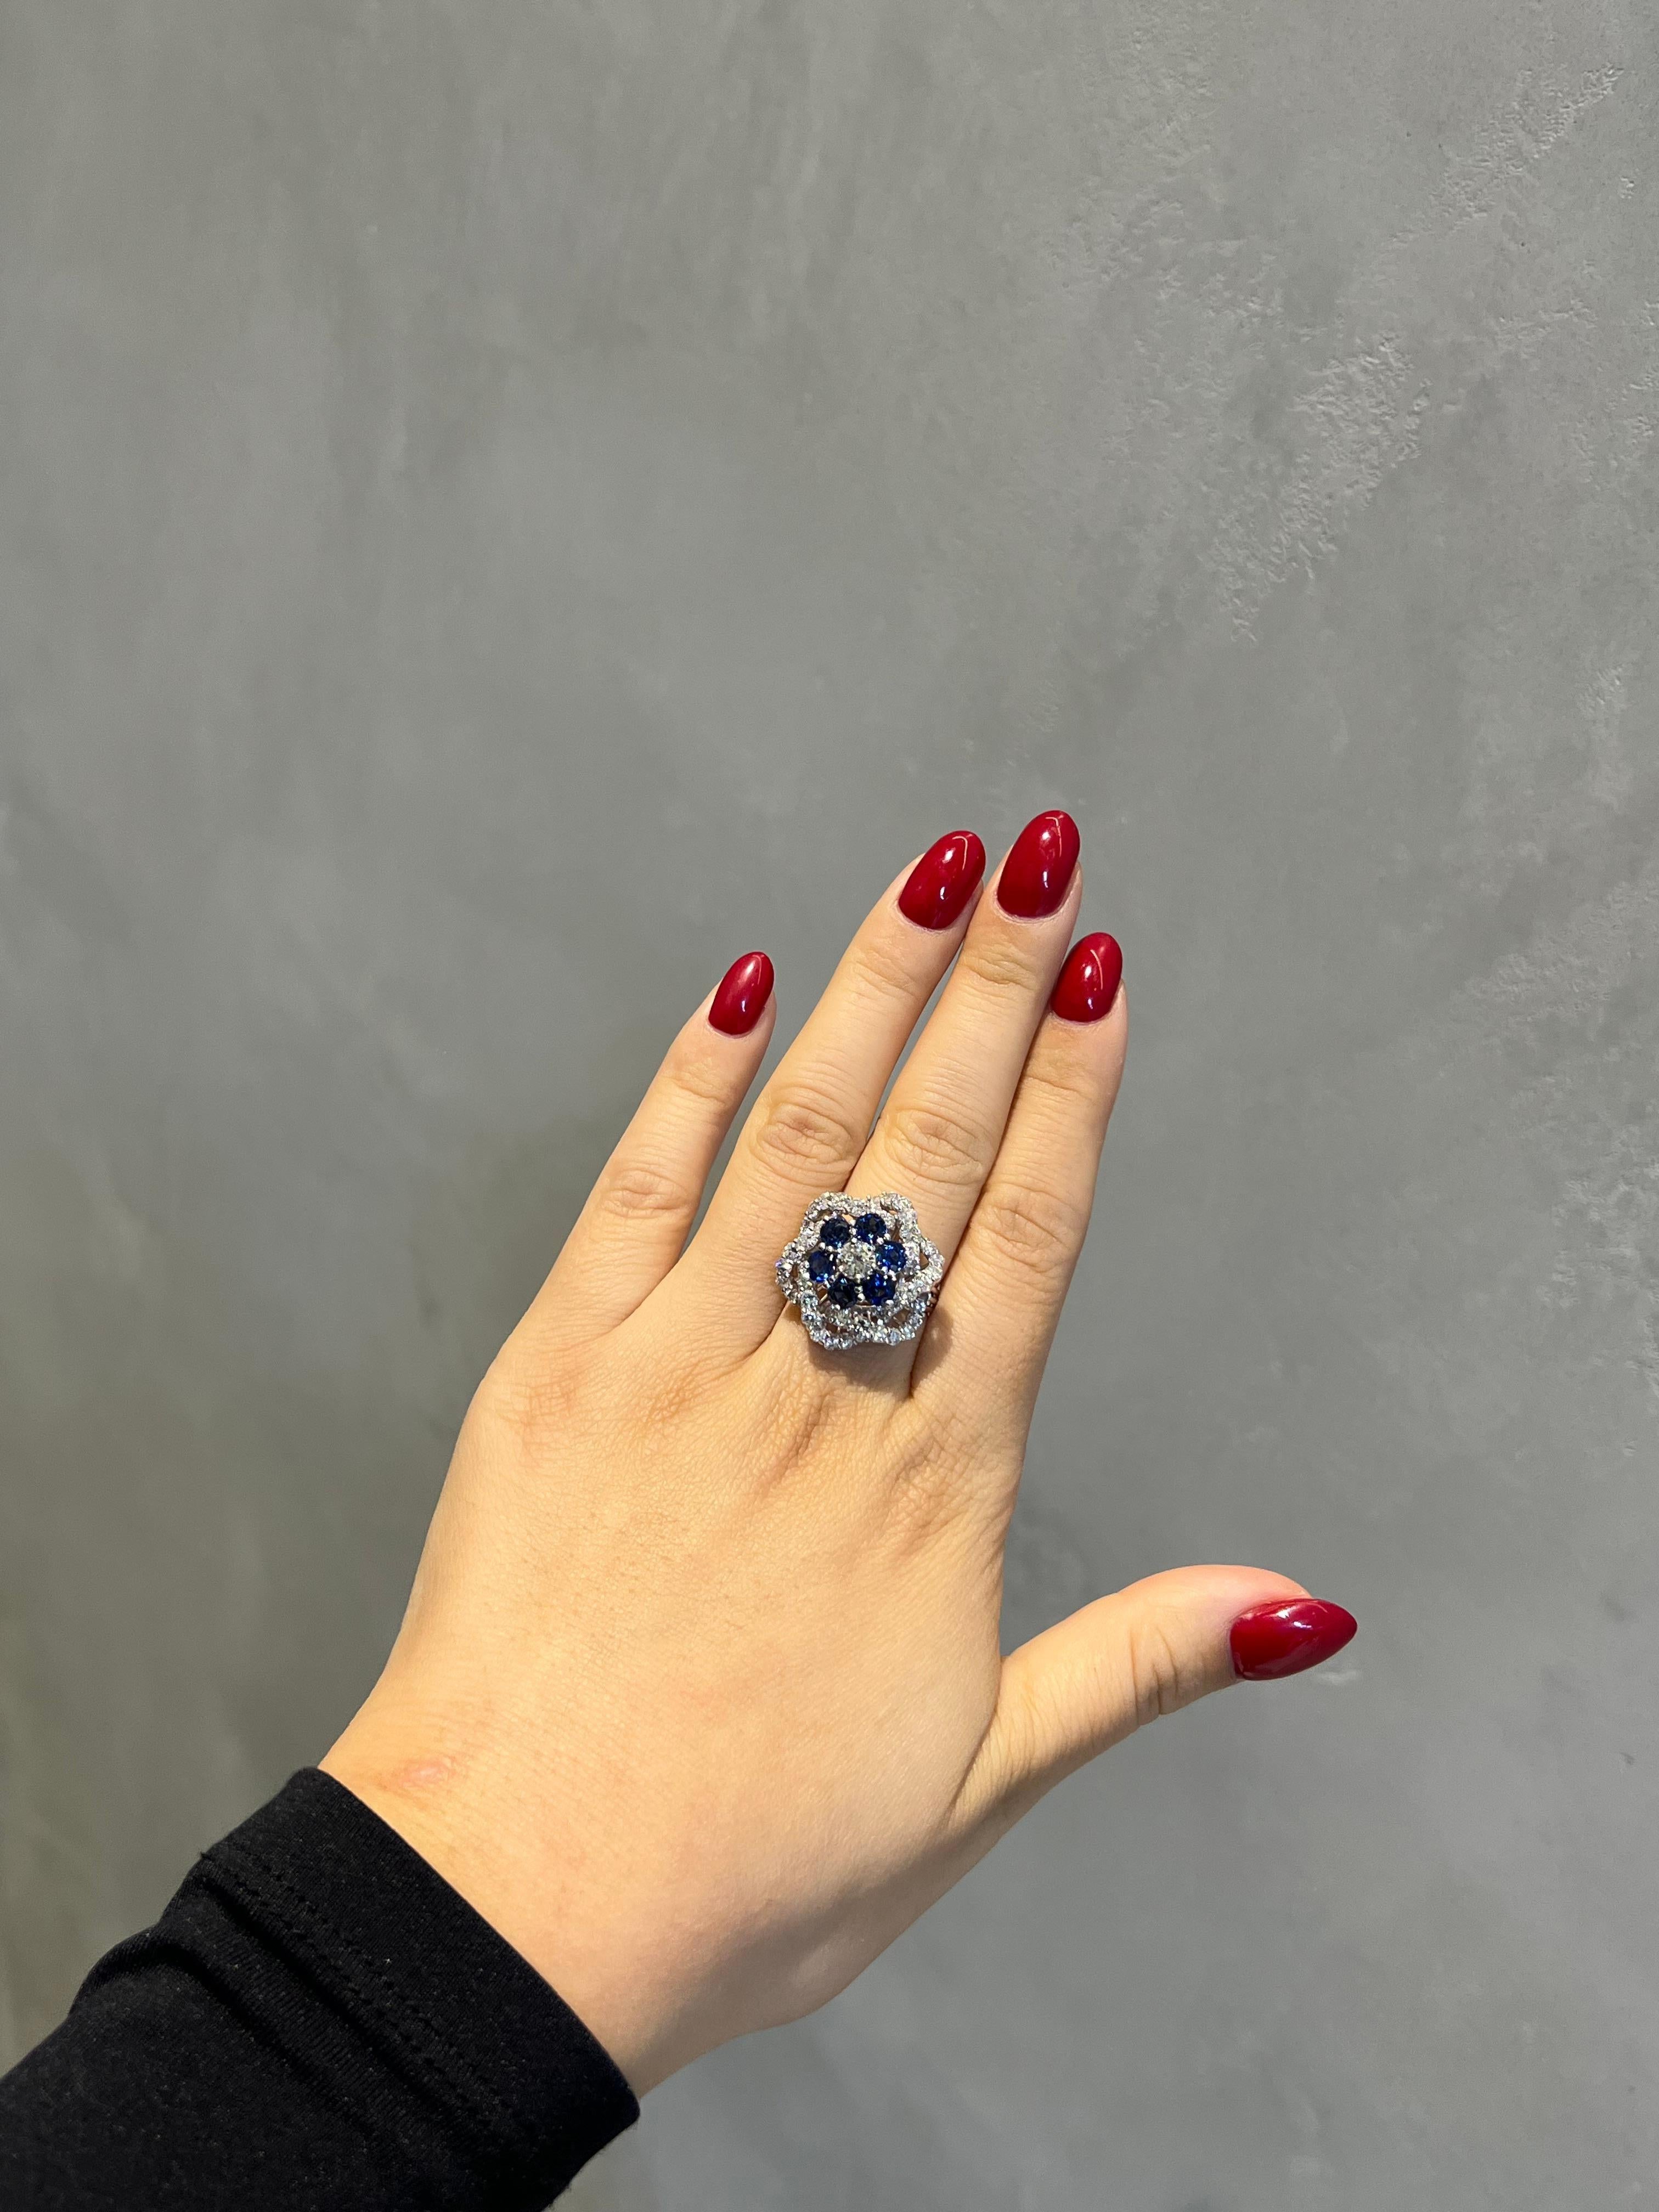 6.41CT Total Weight Blue Sapphire & Diamonds Ring For Sale 1